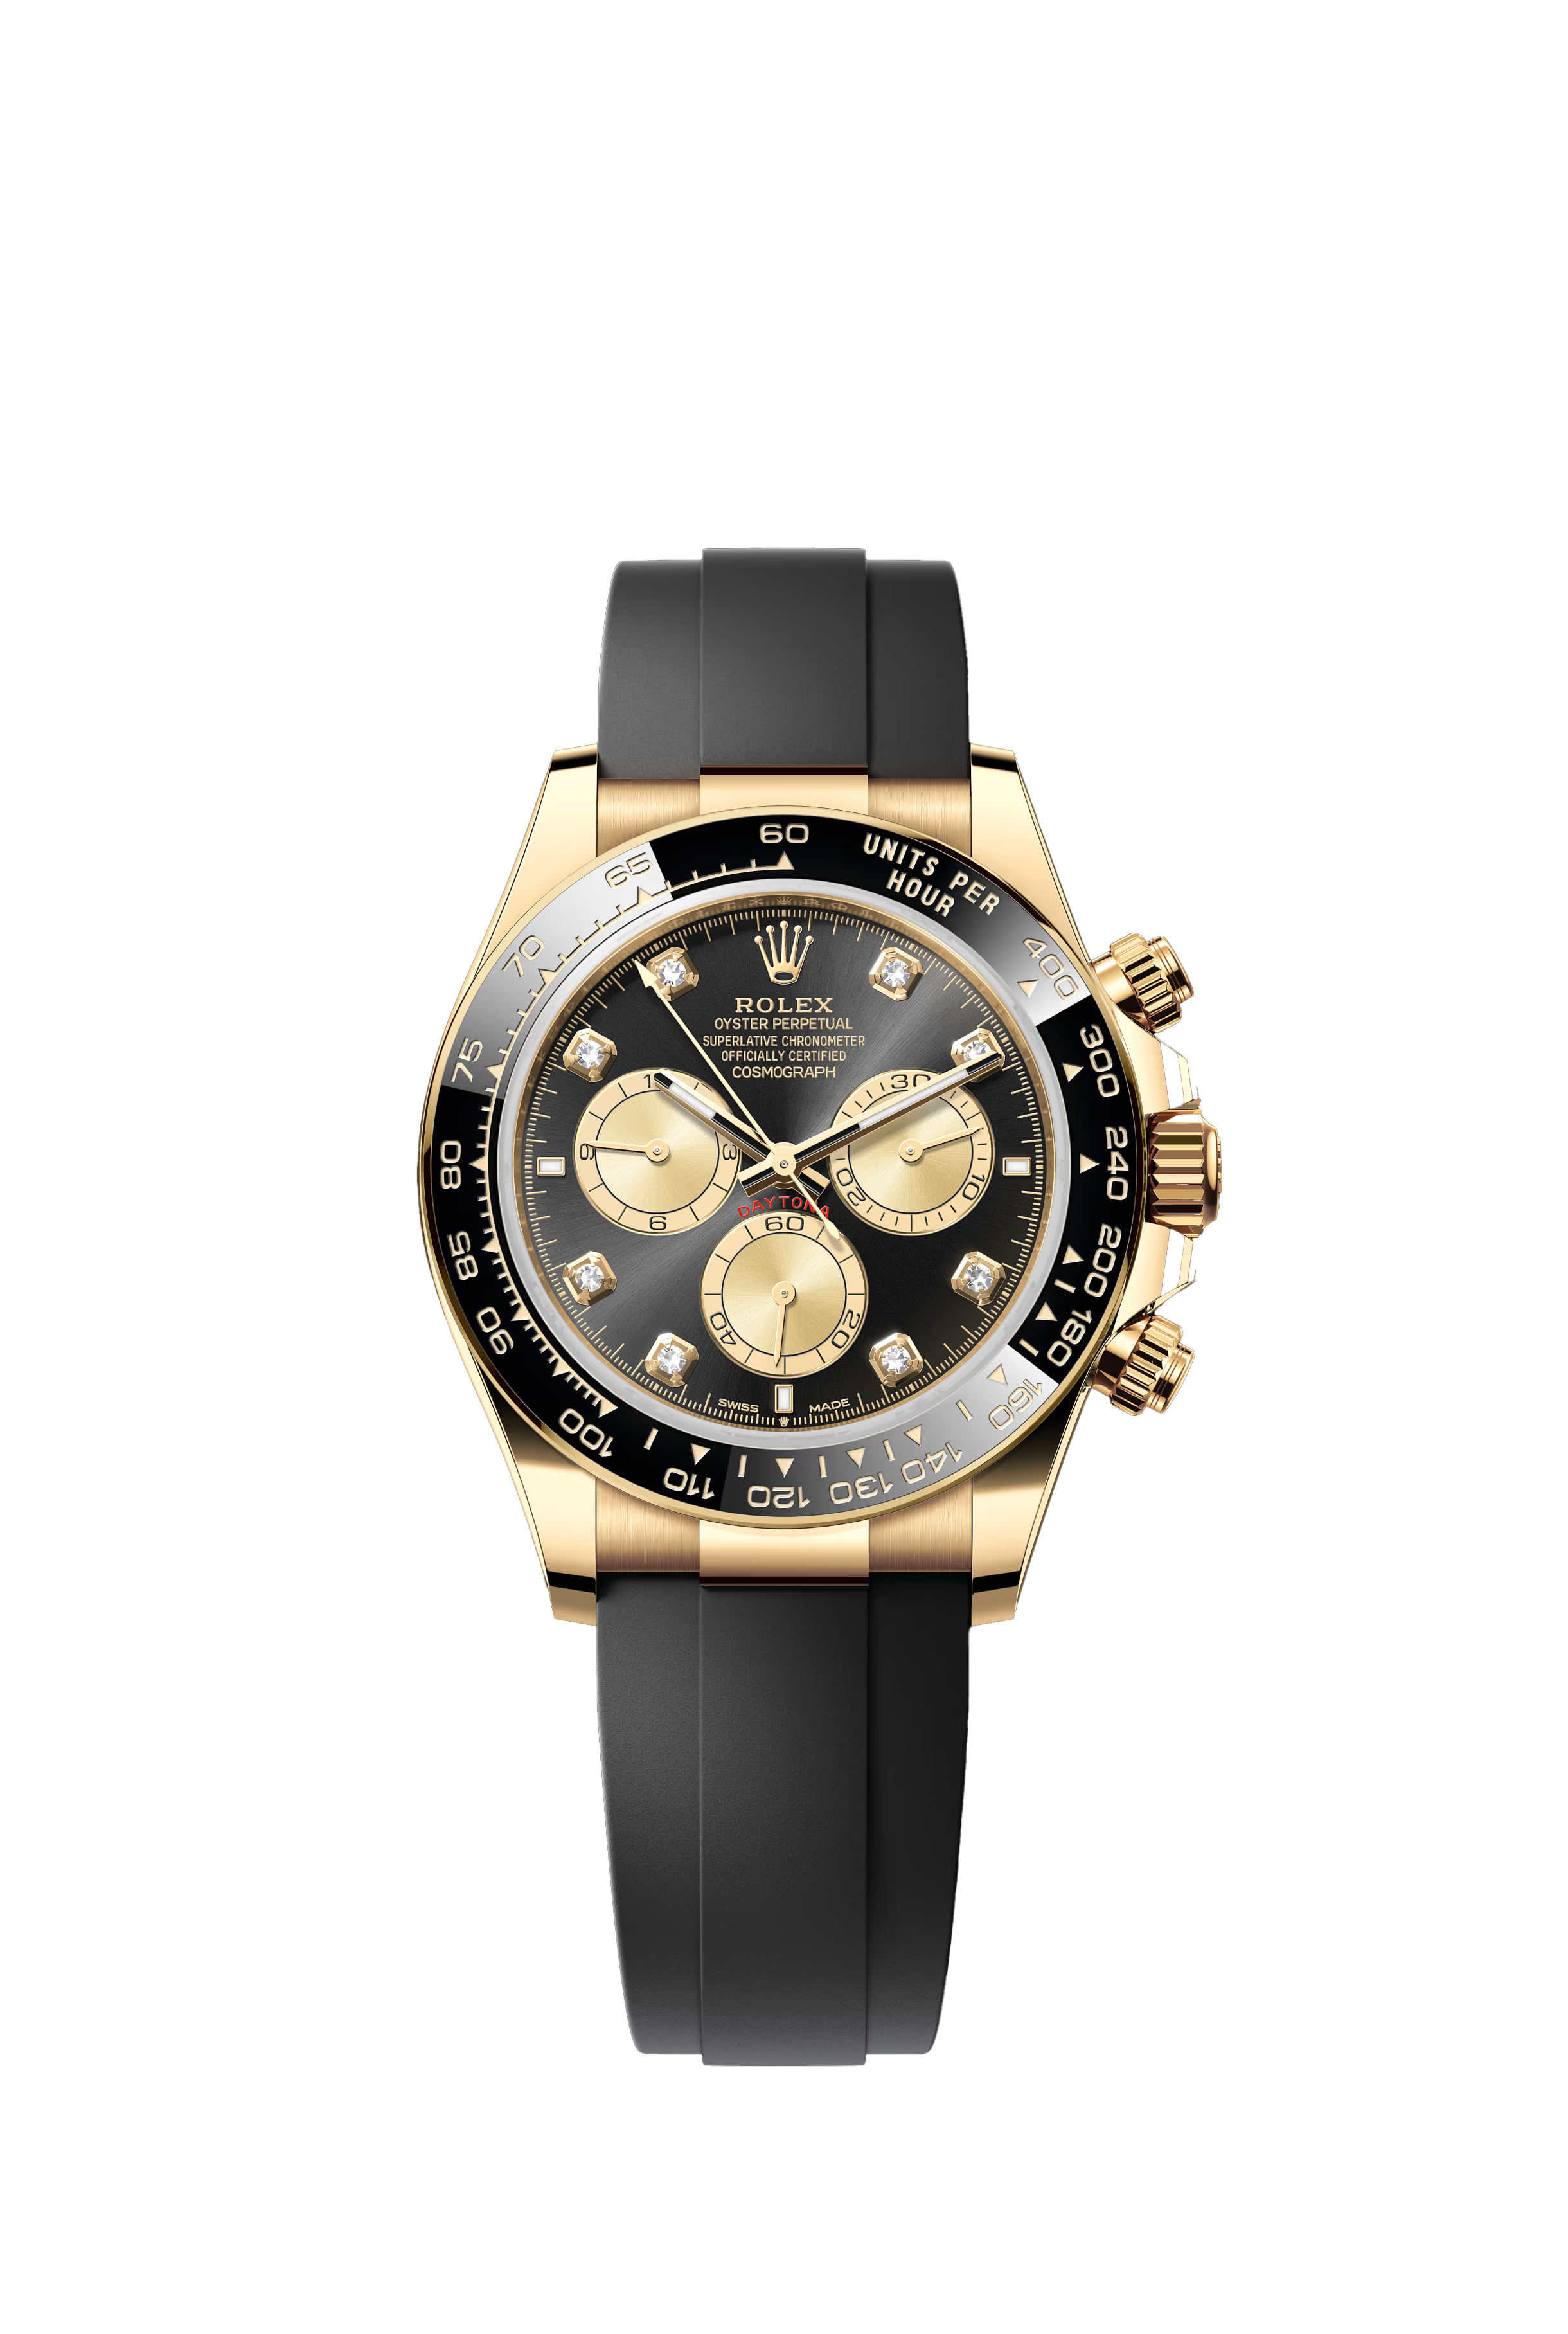 Rolex Cosmograph Daytona Oyster, 40 mm, yellow gold Reference 126518LN